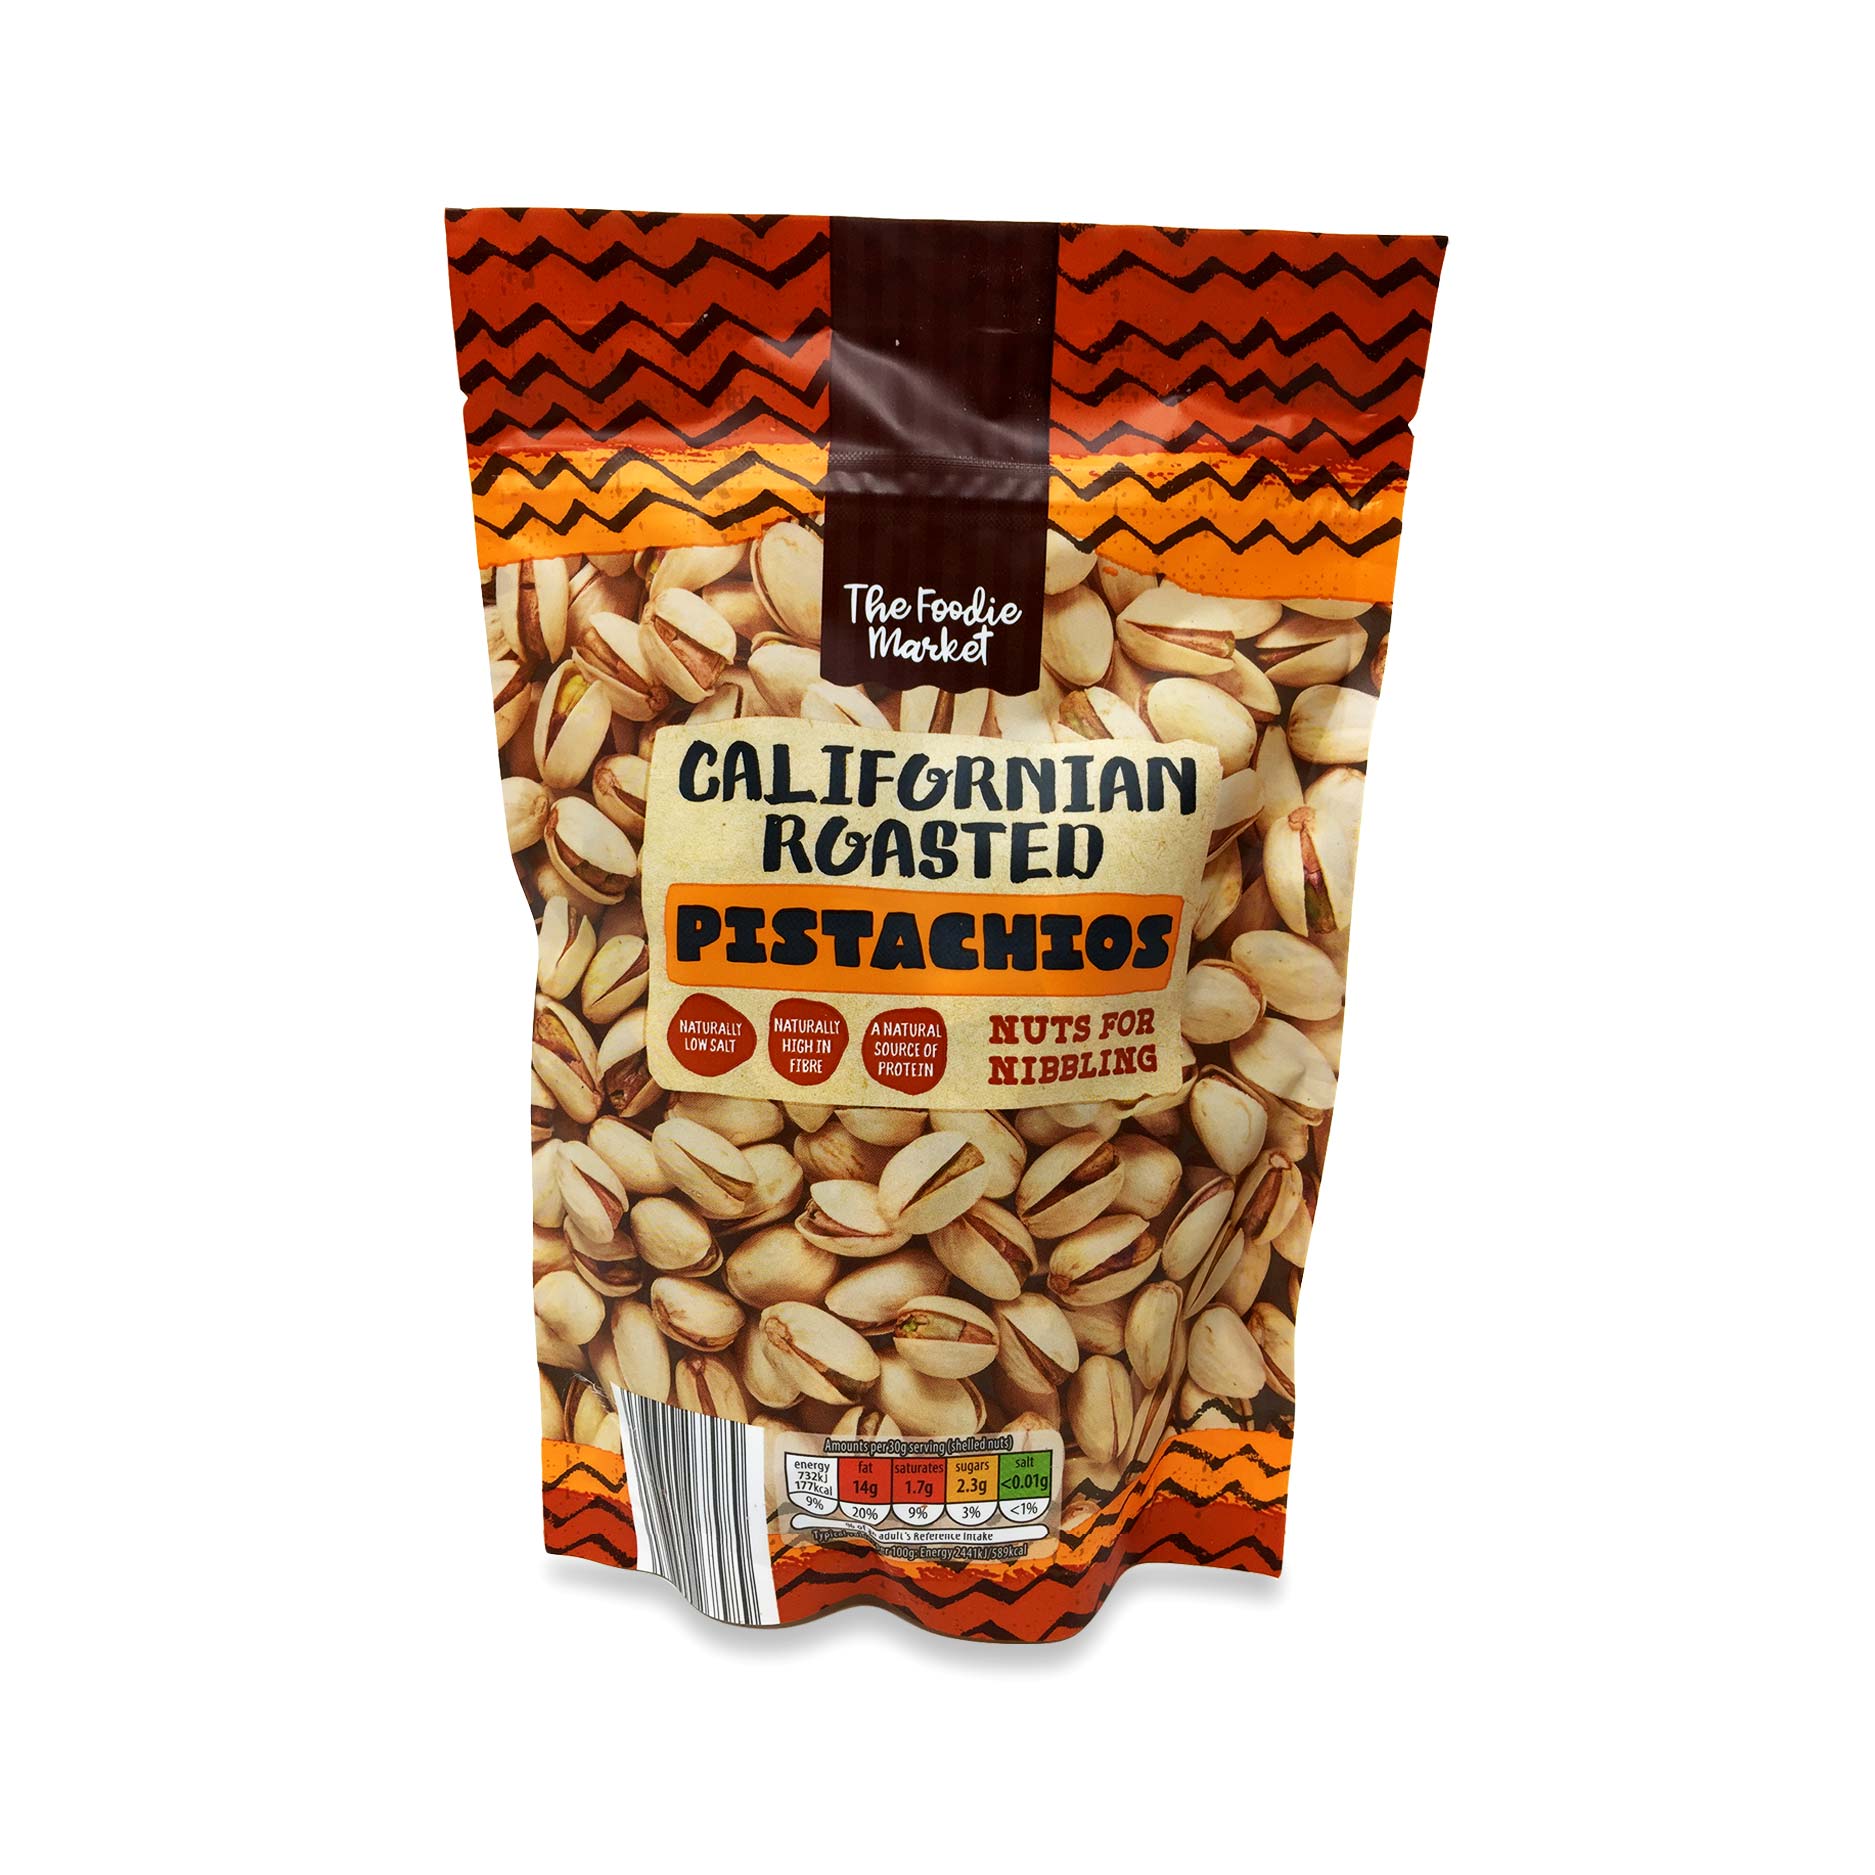 The Foodie Market - Californian Roasted Pistachios 200g